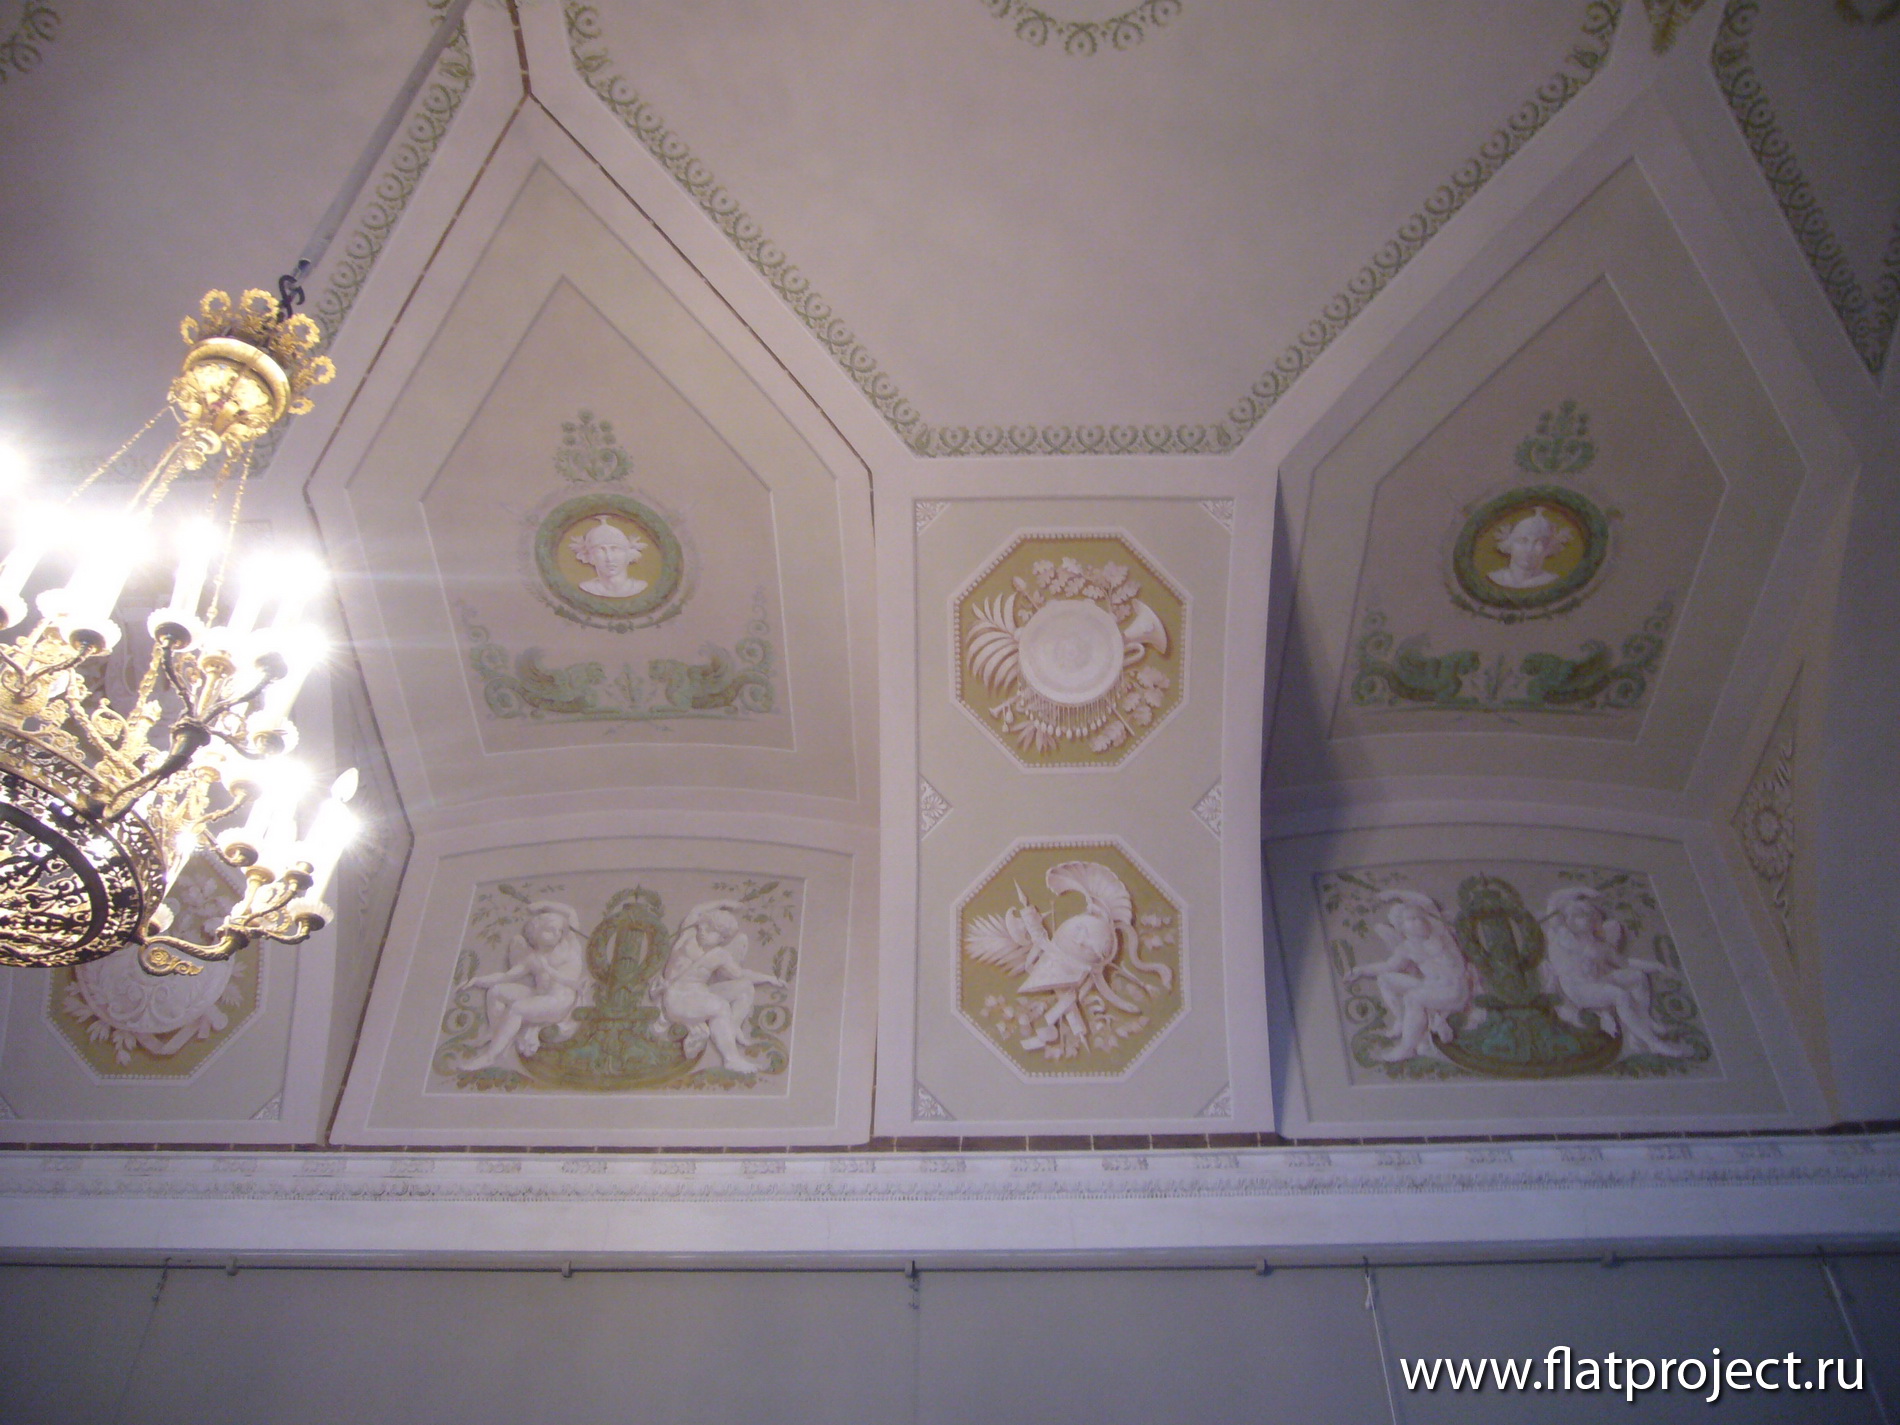 The State Russian museum interiors – photo 32